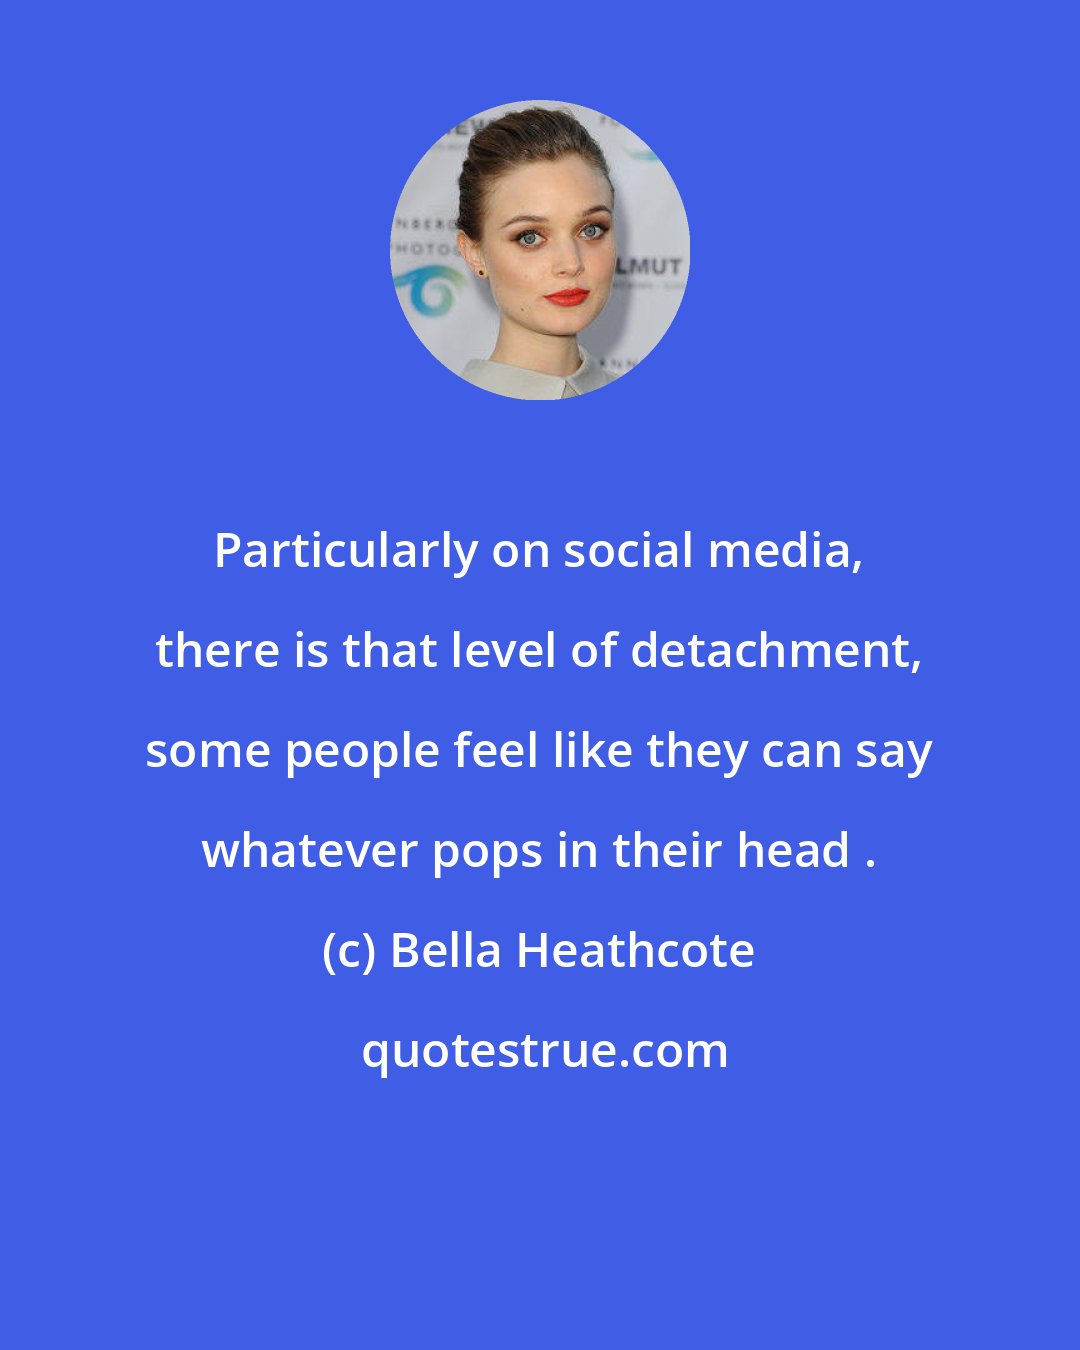 Bella Heathcote: Particularly on social media, there is that level of detachment, some people feel like they can say whatever pops in their head .